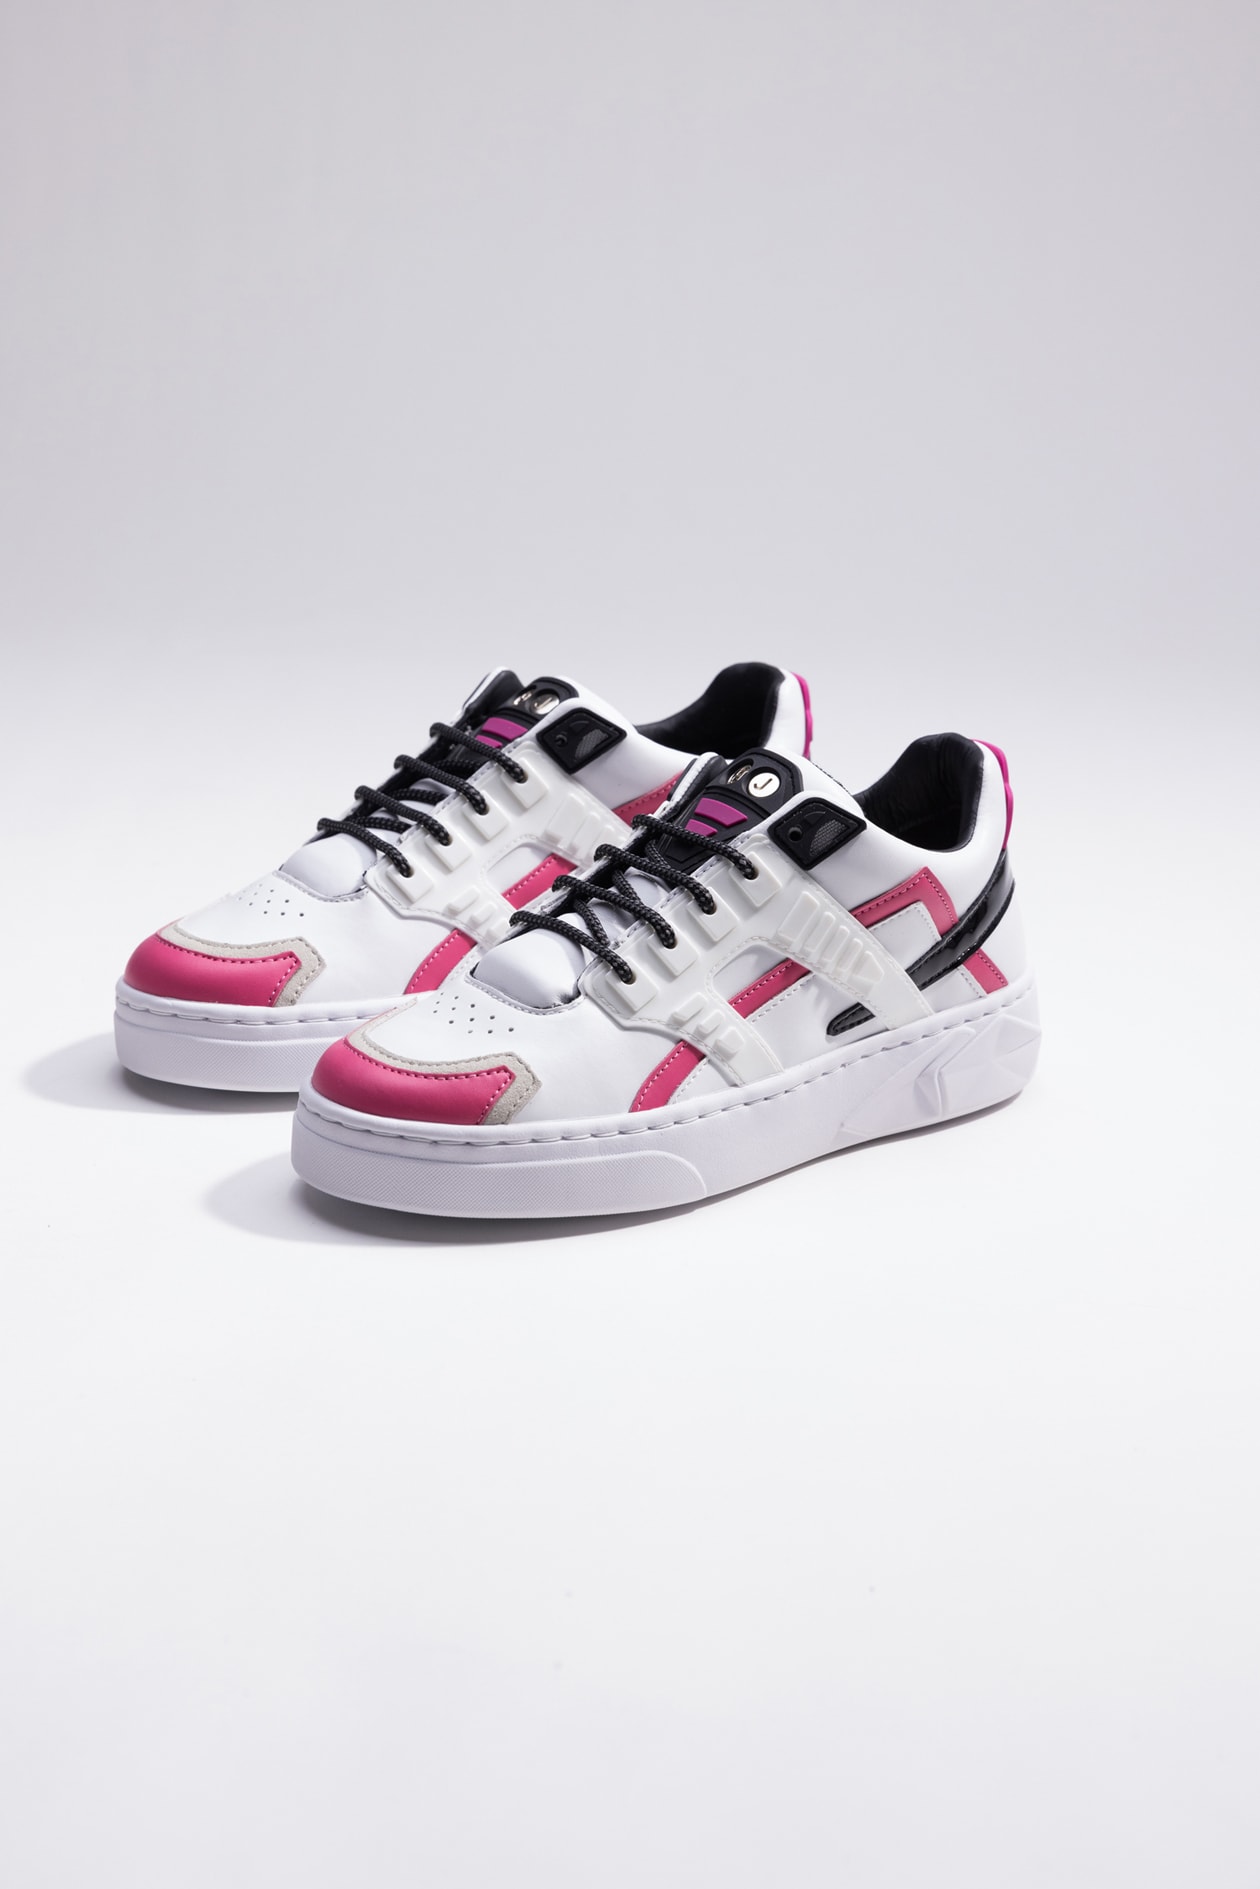 Hide&amp;jack Low Top Trainer - Mini Silverstone Pink White